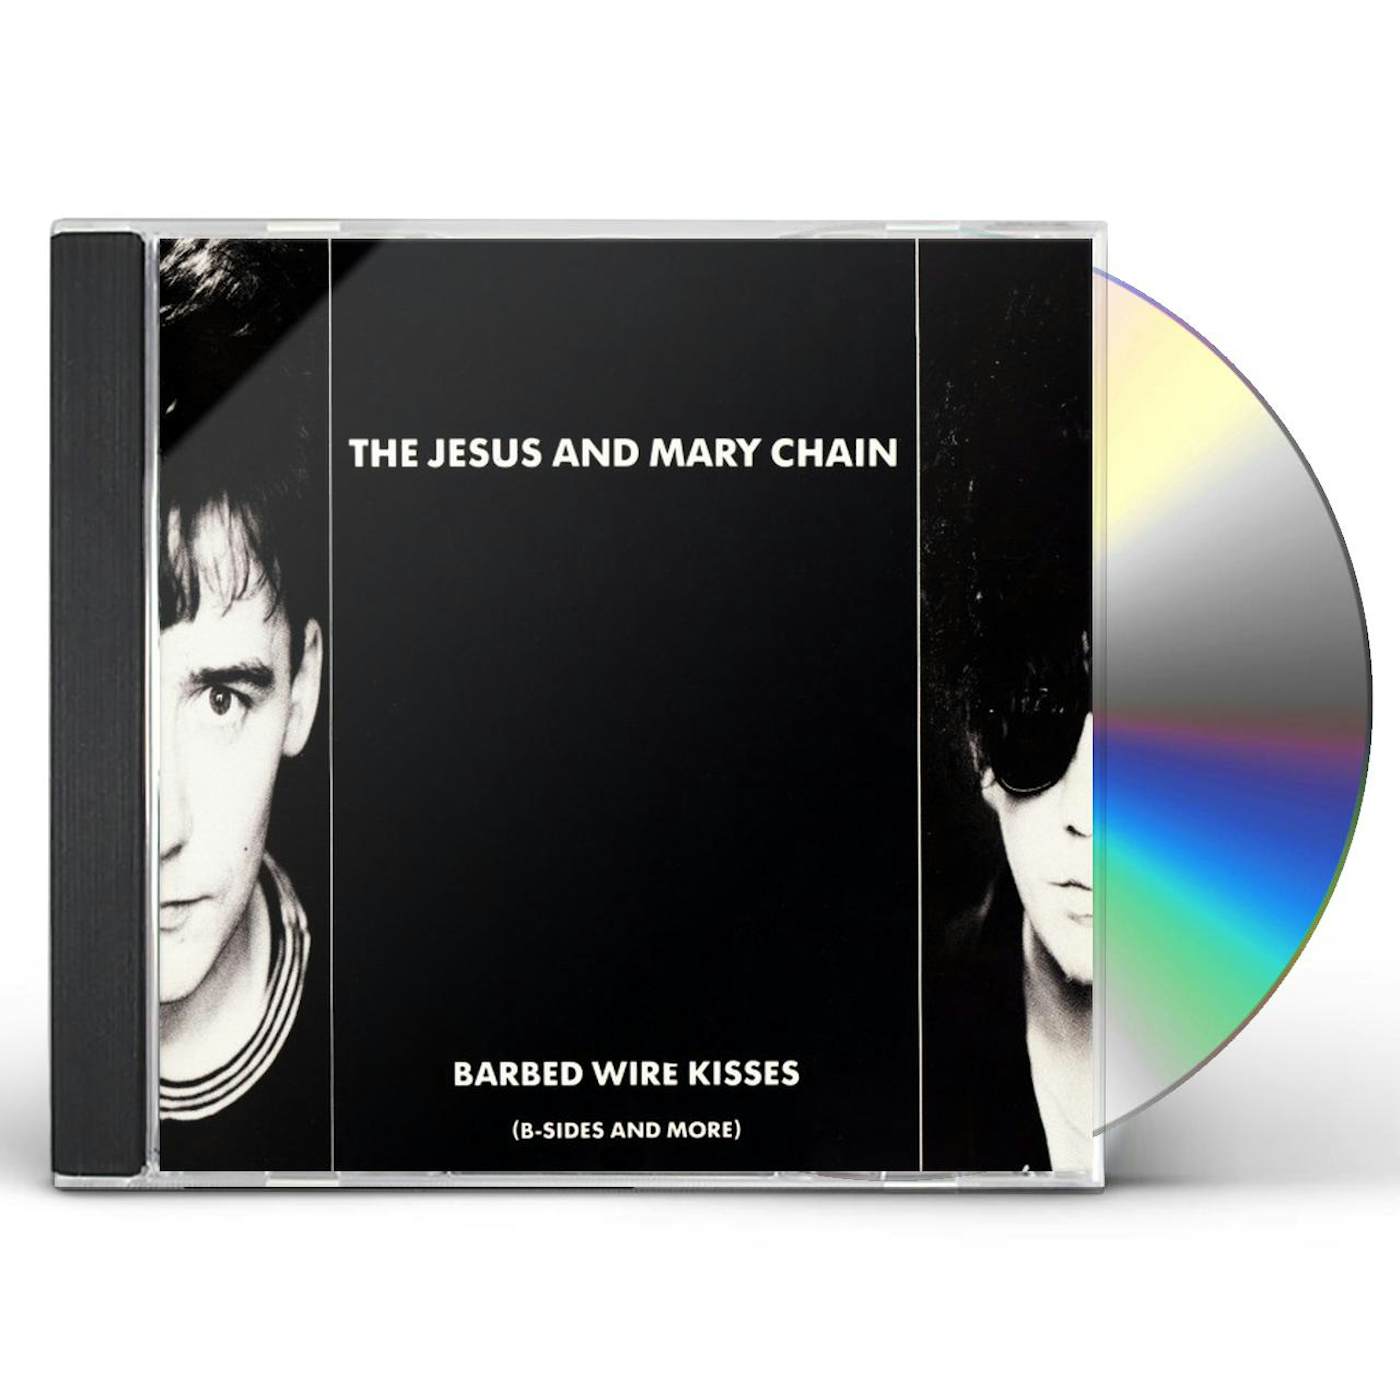 The Jesus and Mary Chain BARBED WIRE KISSES CD